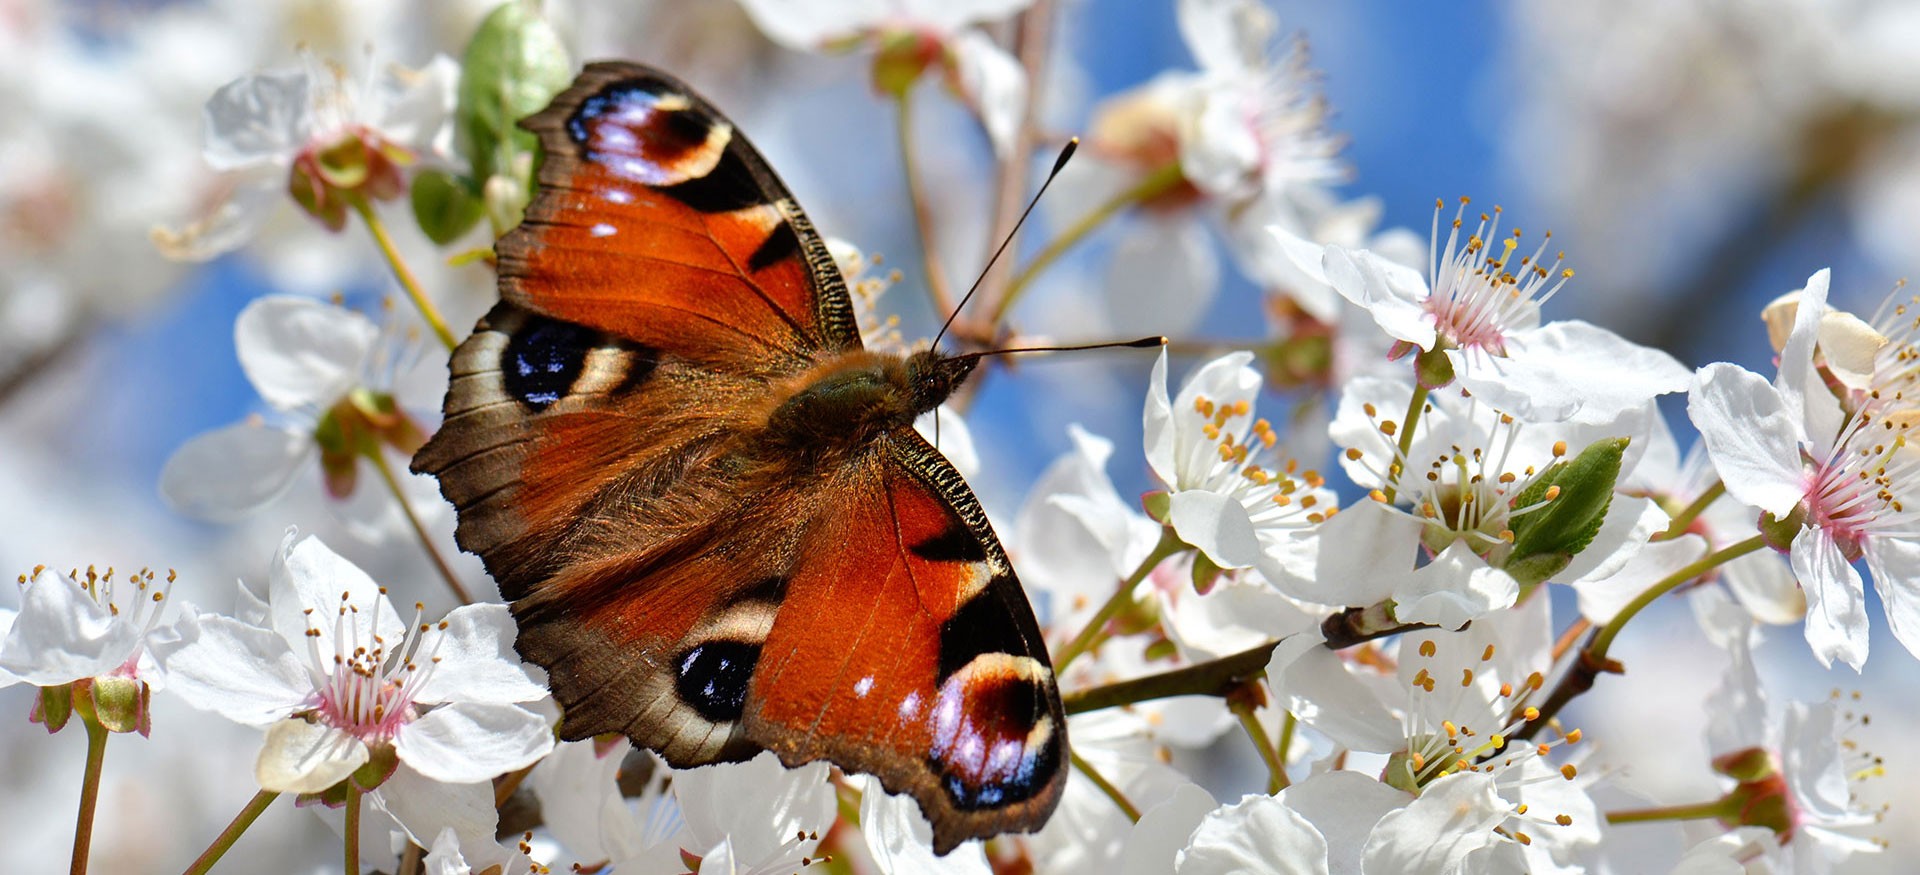 Our favourite signs of spring | Natural History Museum